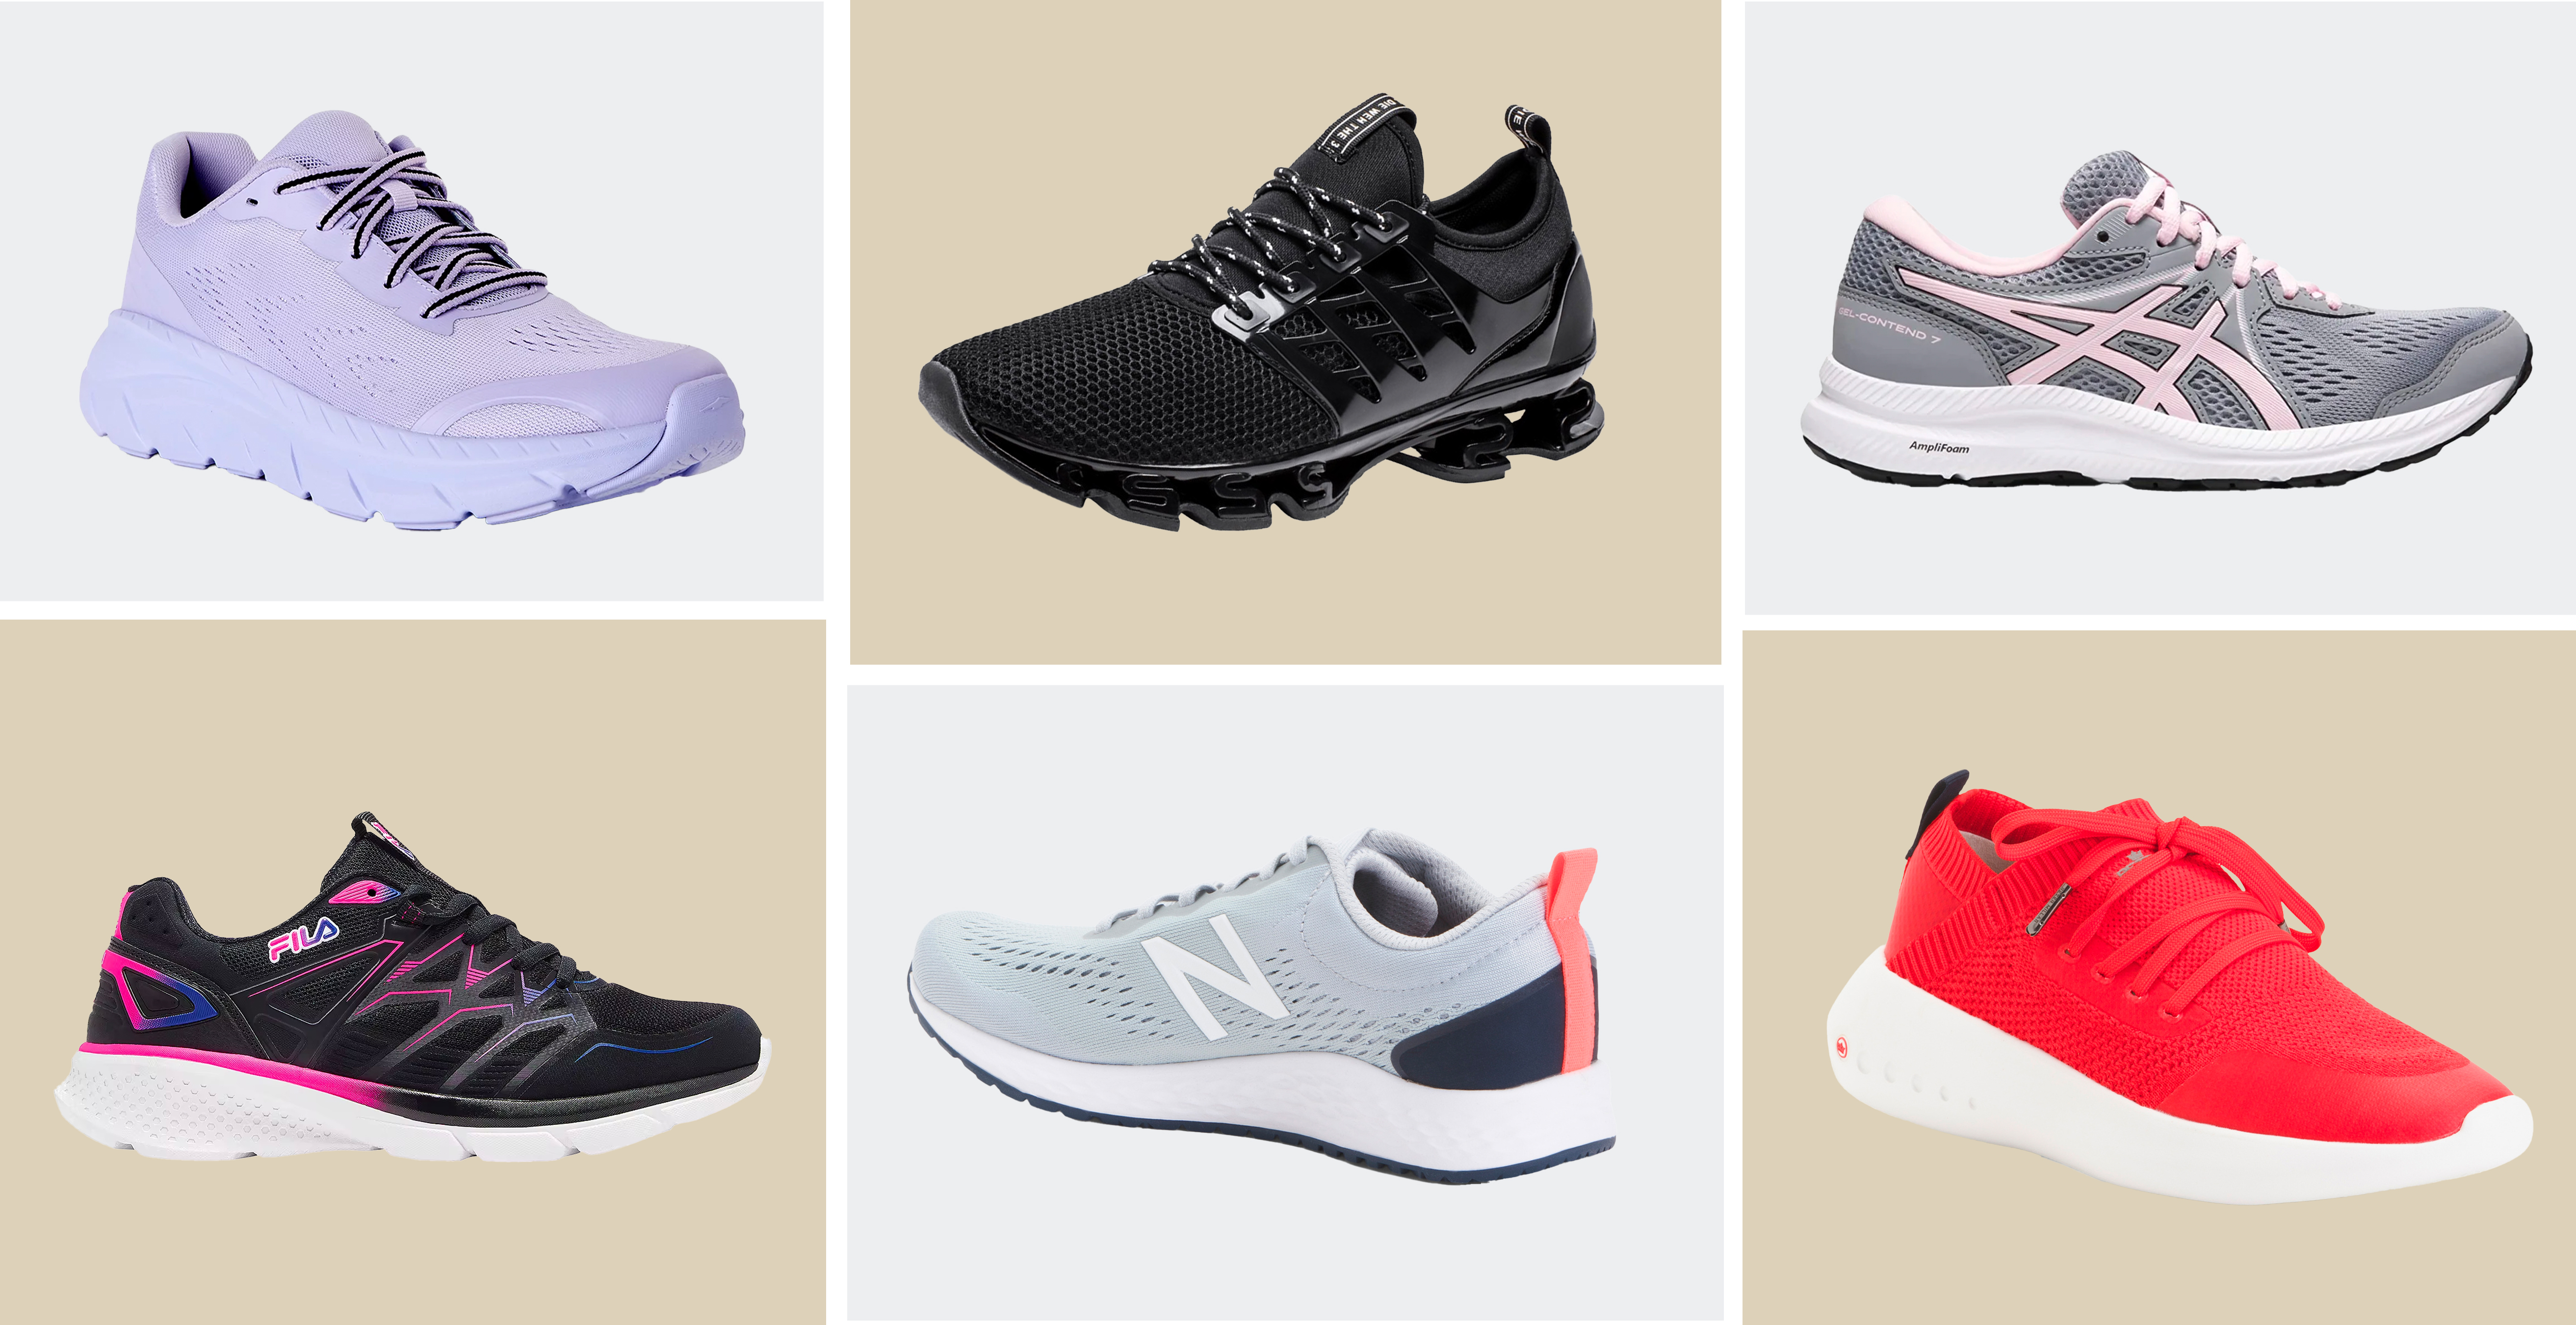 Best Cheap Running Shoes: Discounts on Nike, Adidas, and More - The Krazy Coupon